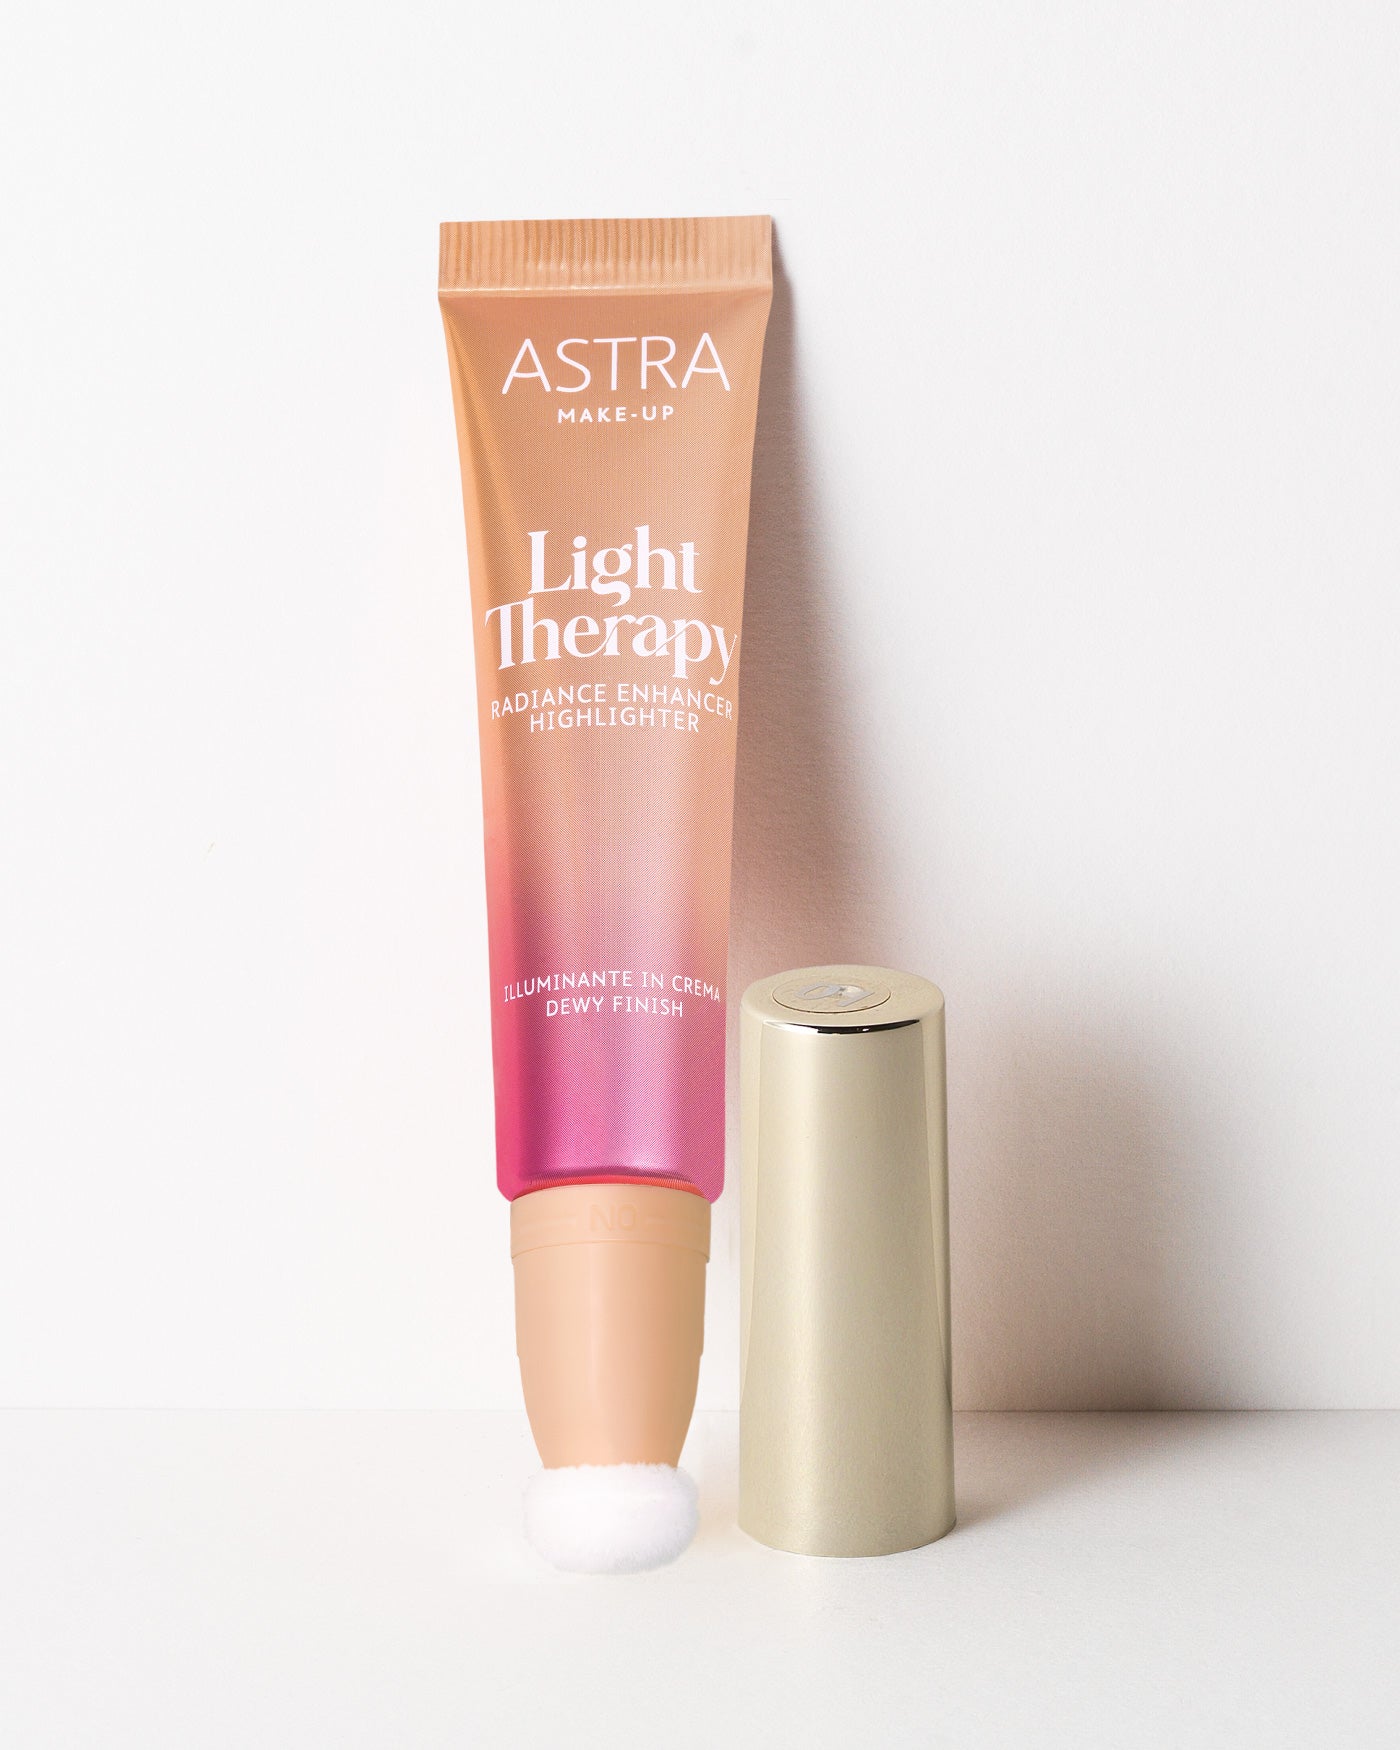 LIGHT THERAPY - Make-Up - Astra Make-Up